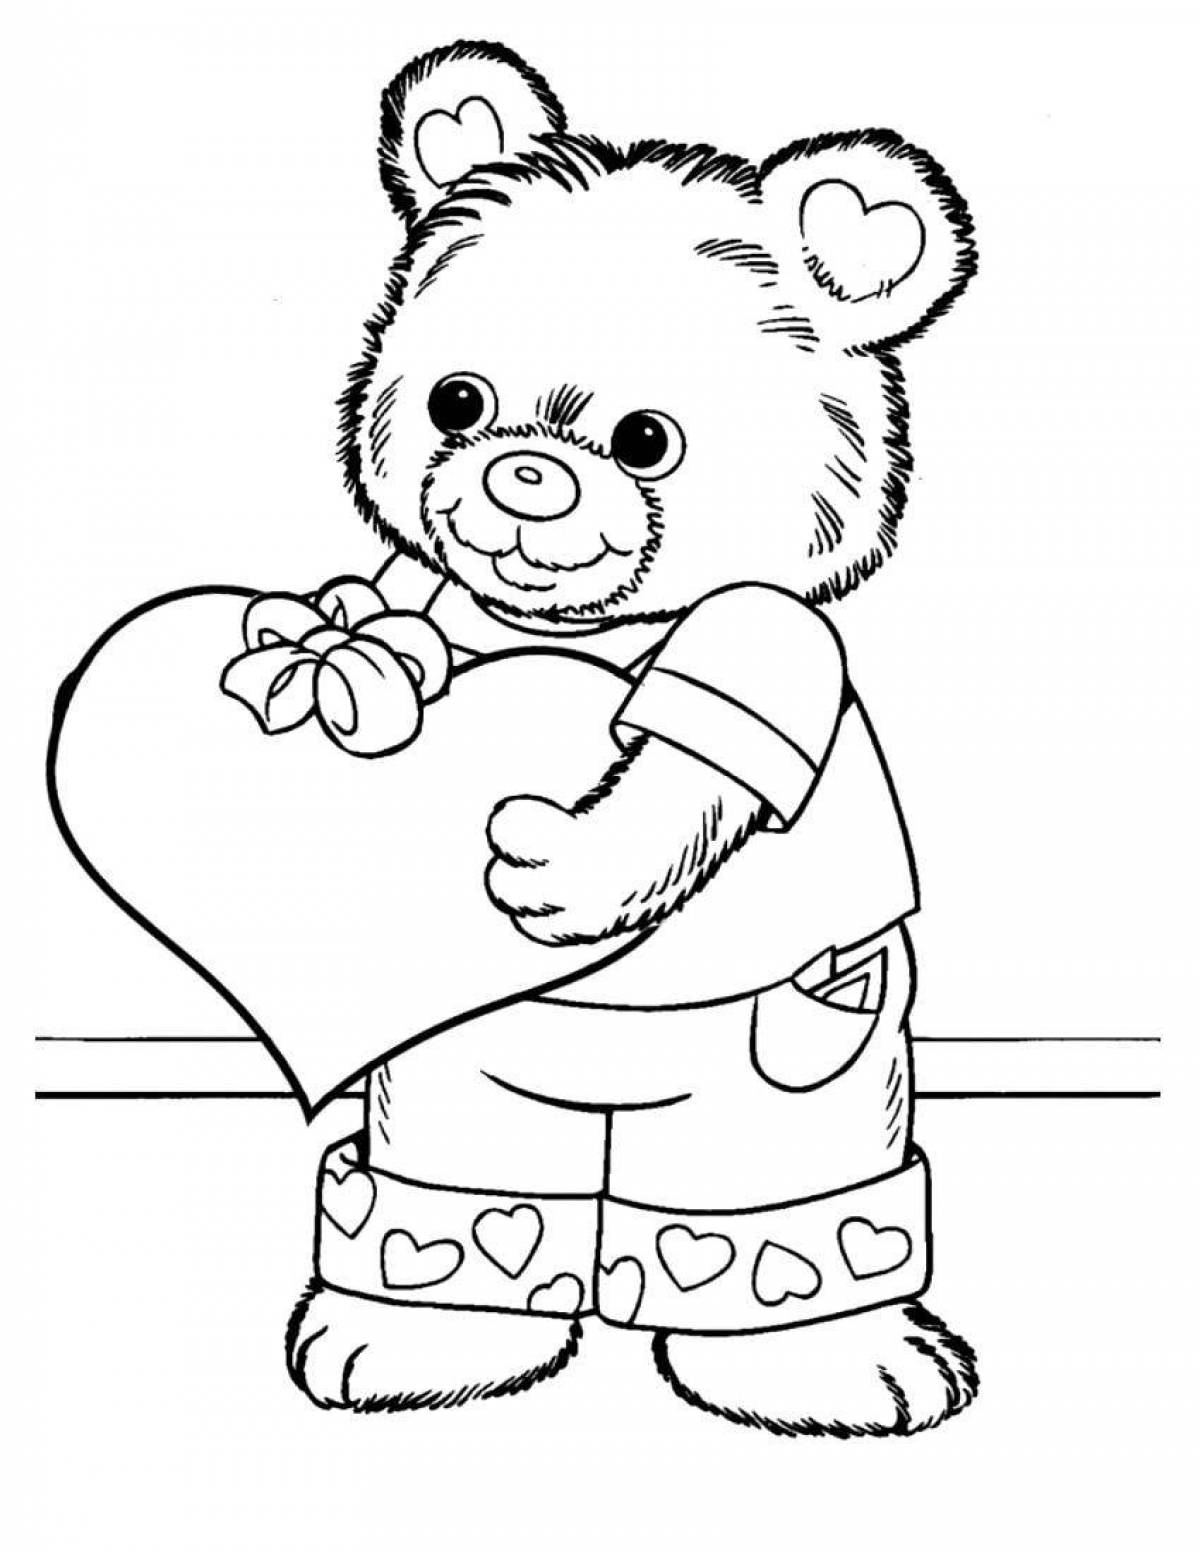 Soft teddy bear coloring book for kids